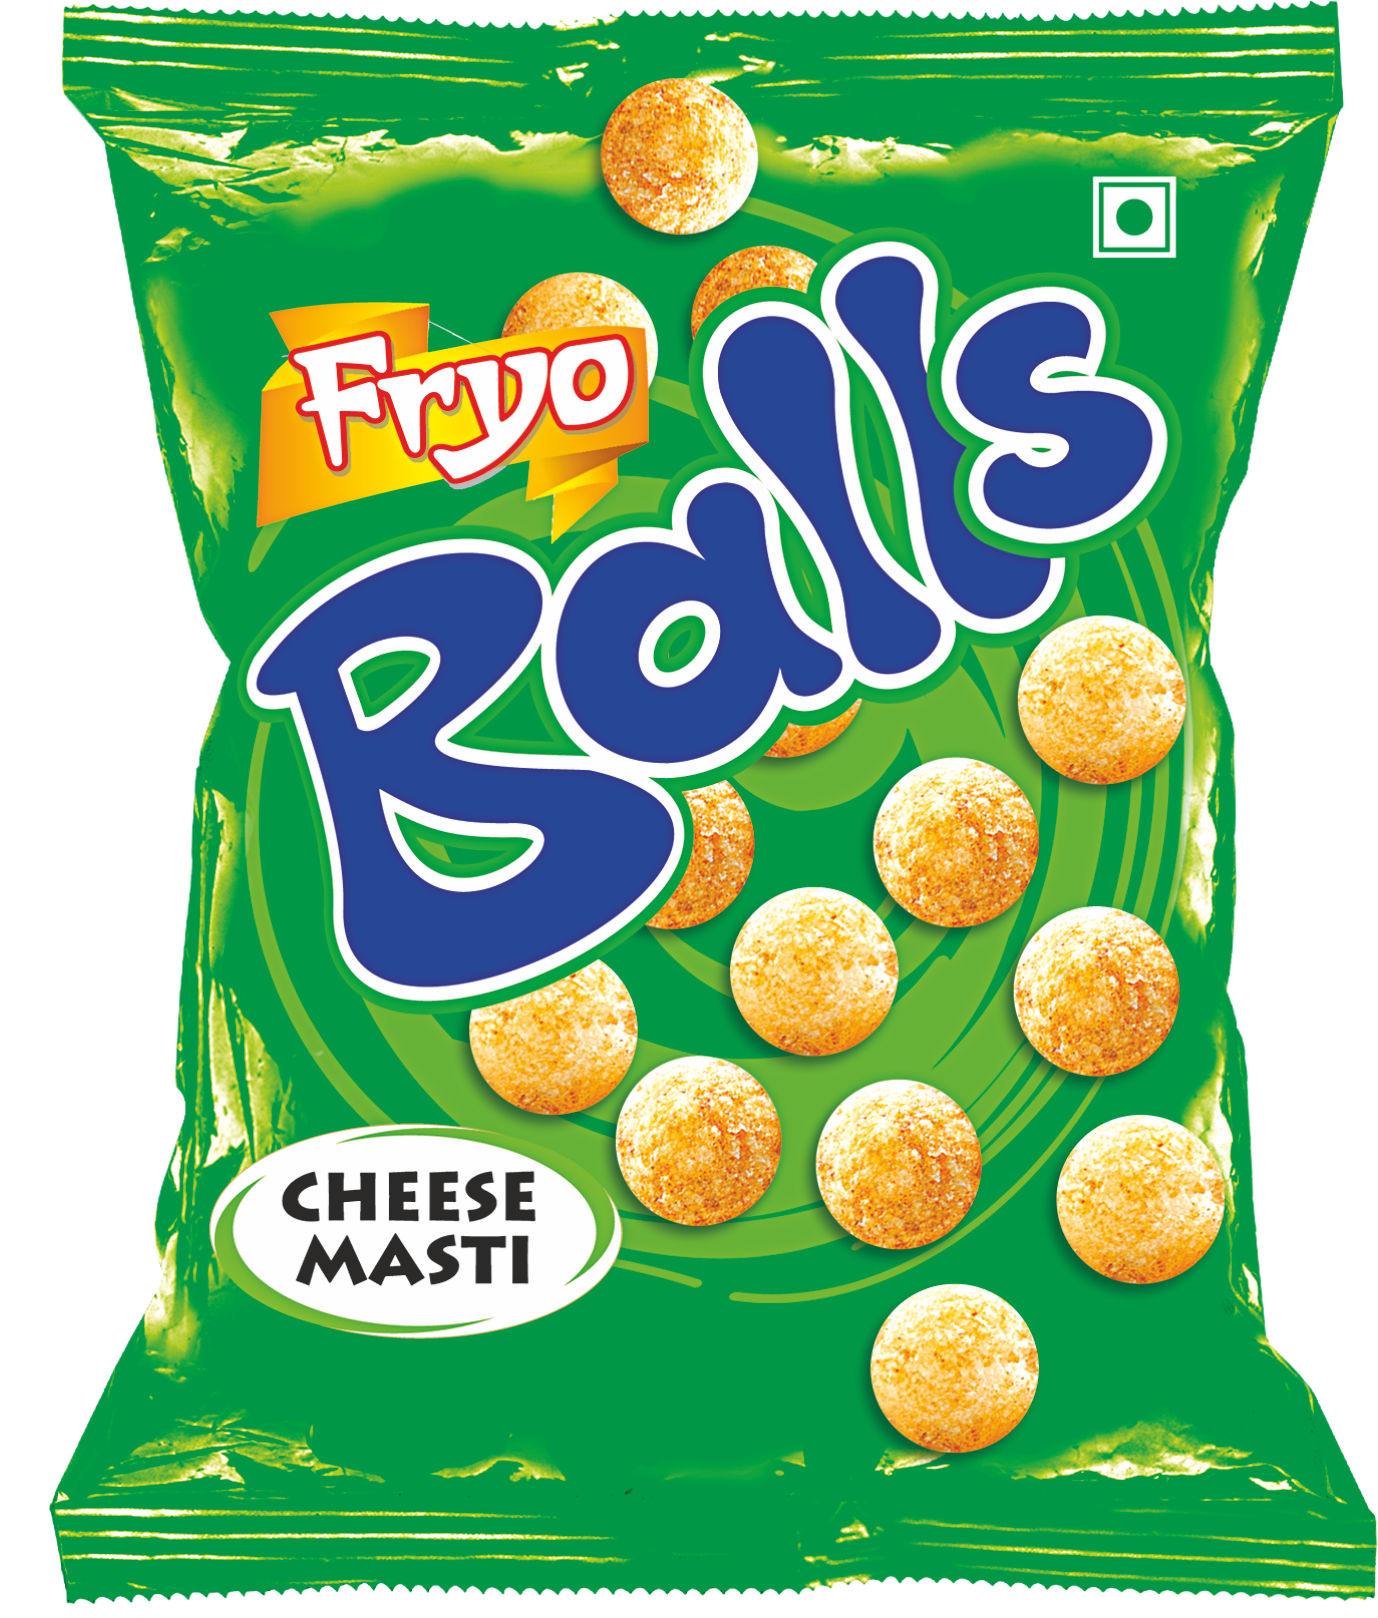 BALLS CHEESE
Net Content
Price
15 gm.
5 Rs.
35 gm.
10 Rs.
90 gm.
20 Rs.